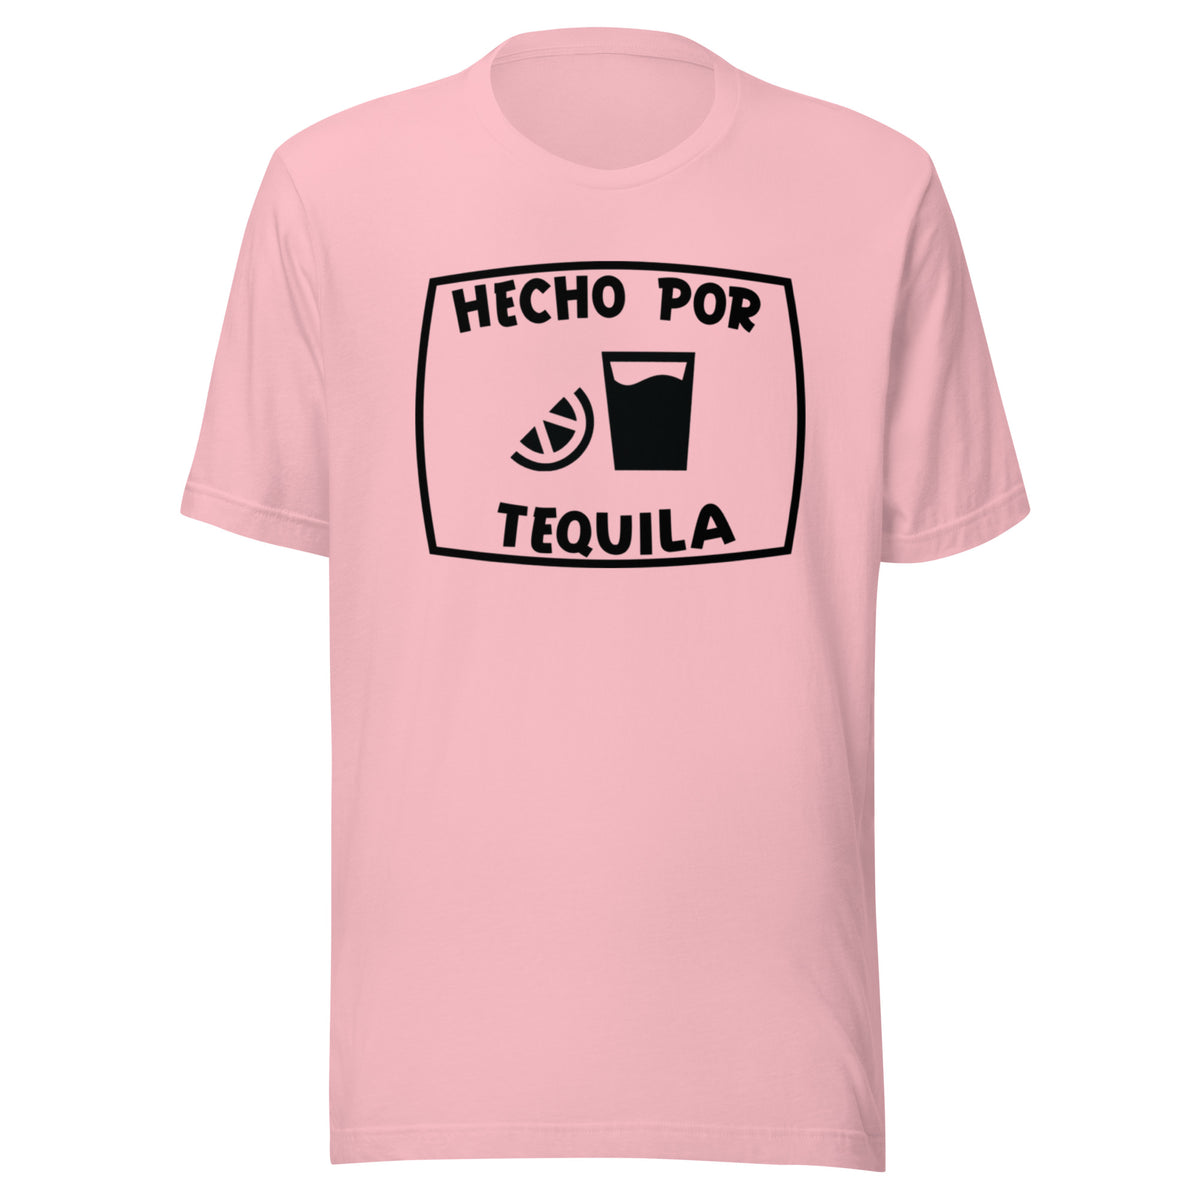 Hecho por Tequila T-shirt (Made by Tequila)